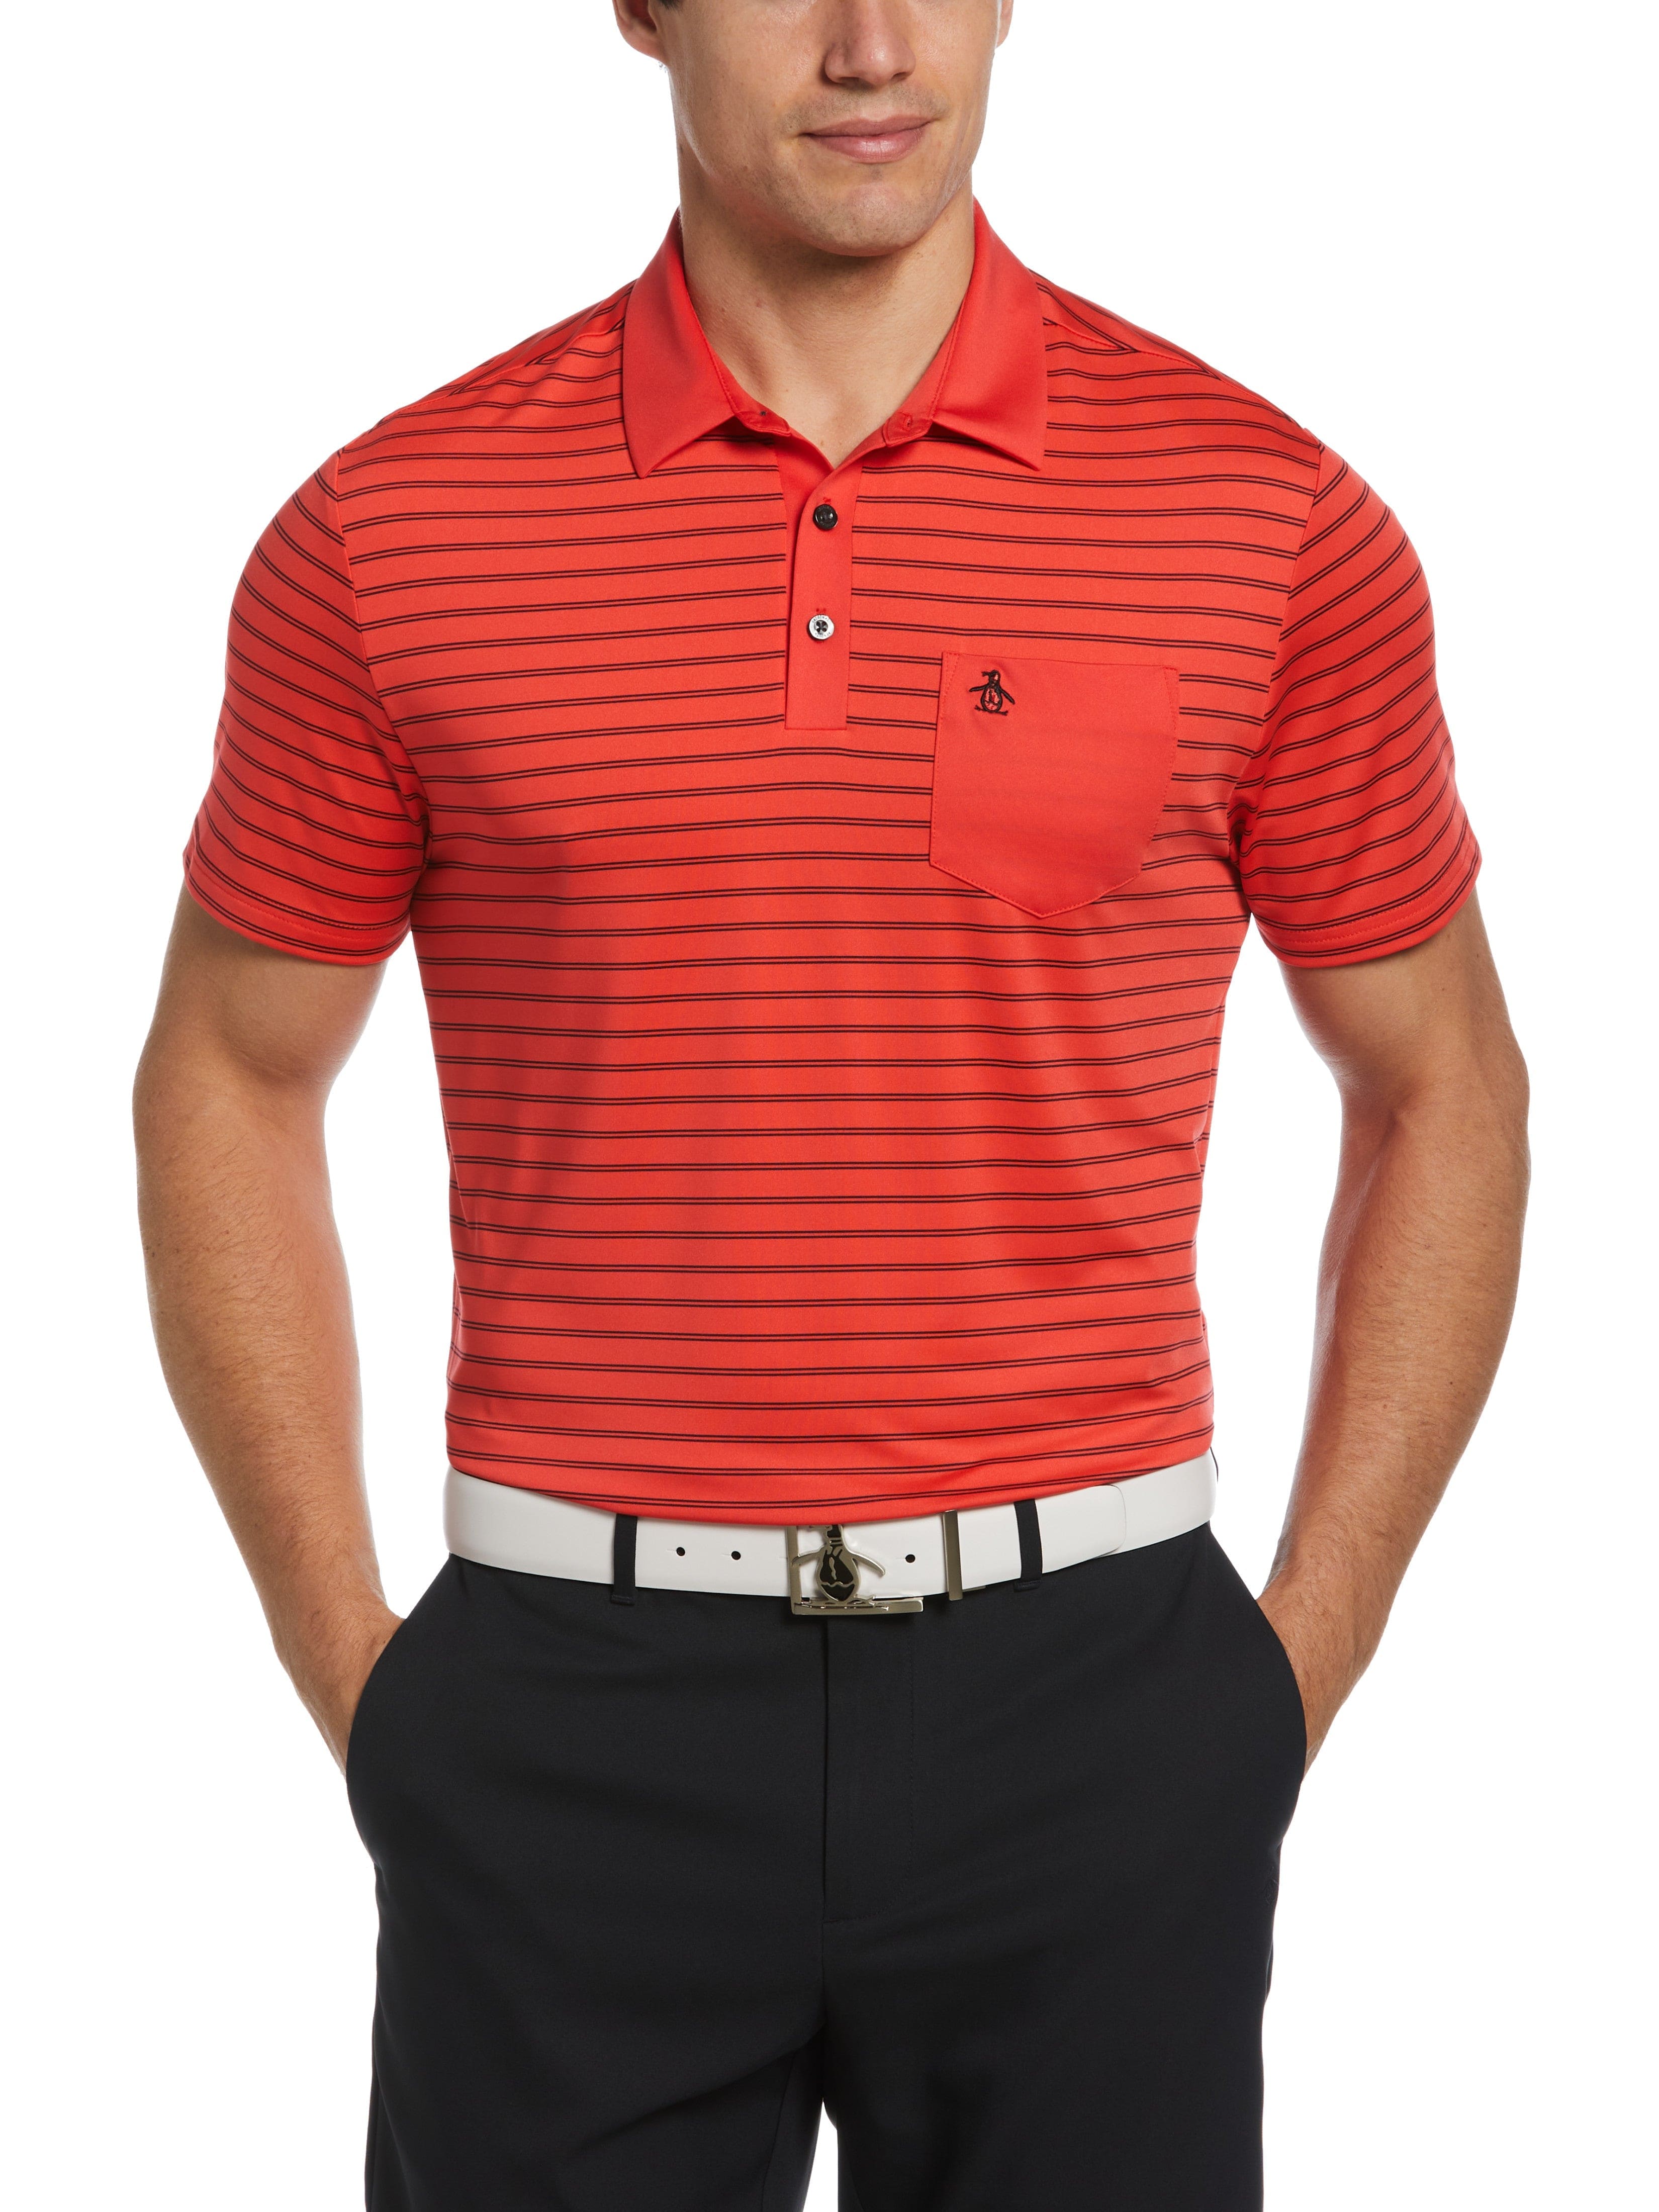 Original Penguin Mens Two-Color Stripe Golf Polo Shirt, Size XL, Bittersweet Red, Polyester/Spandex | Golf Apparel Shop